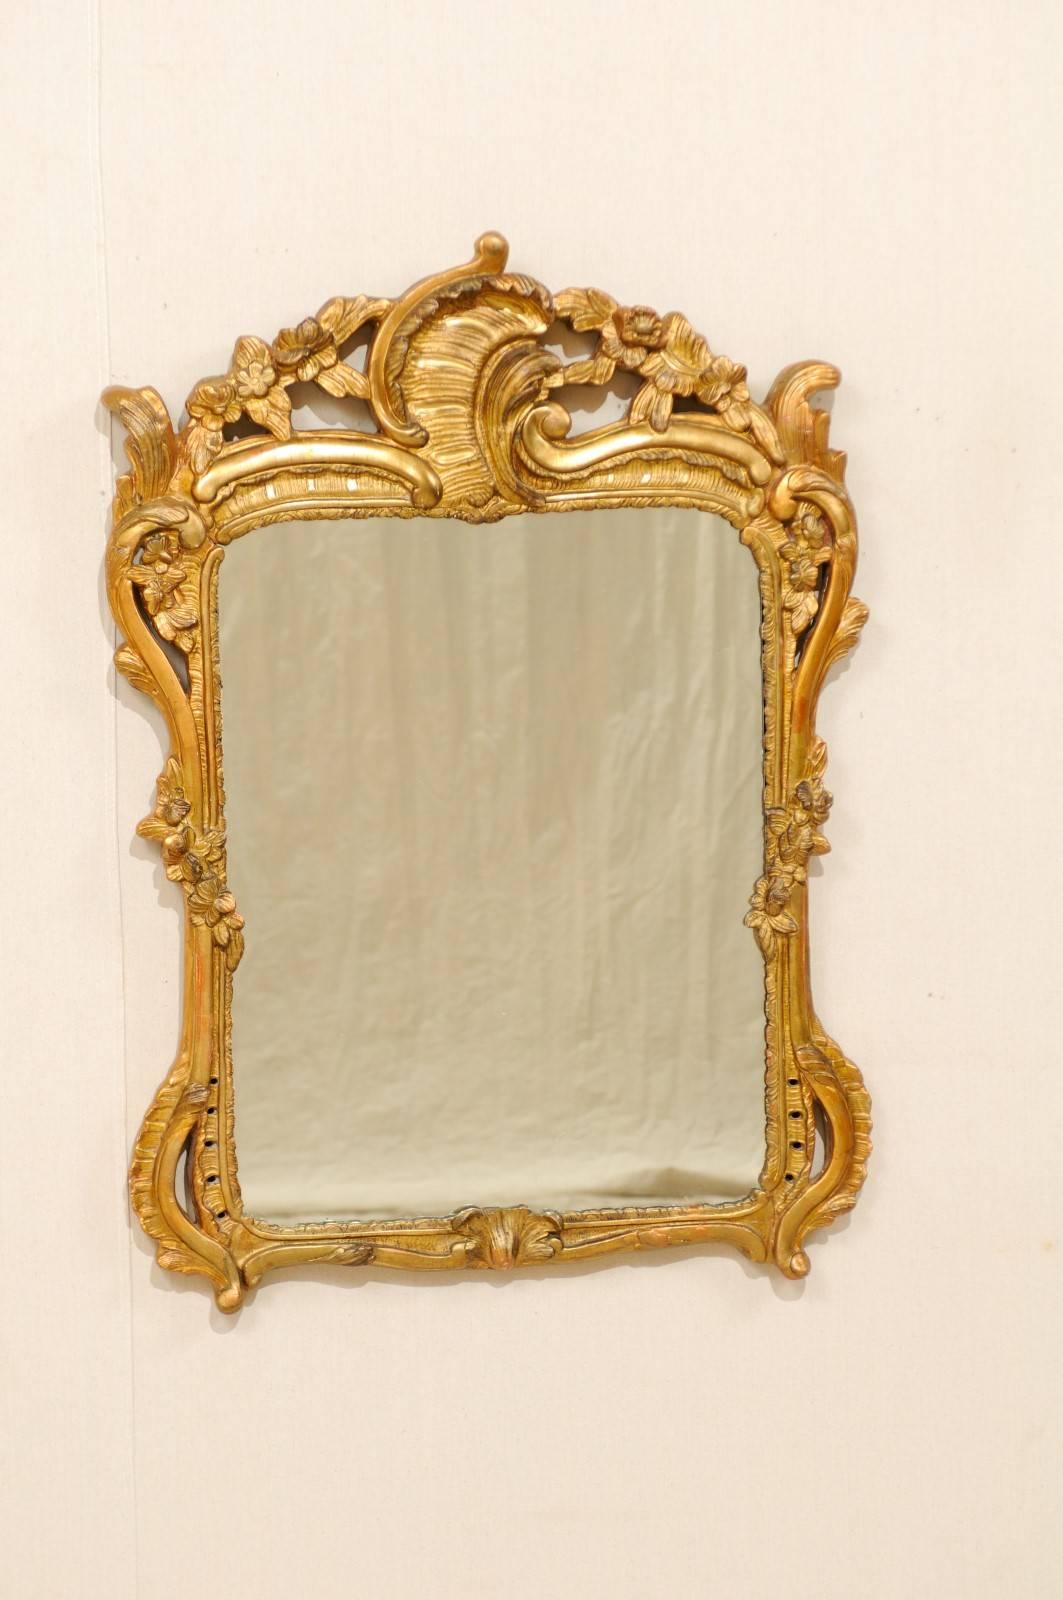 An Italian Rococo style wood carved mirror. This 19th century Italian rectangular shaped mirror features a richly carved raised crest in a floral and leaf motif. The sweetly carved flowers are repeated and hug the mirror at each center side. The